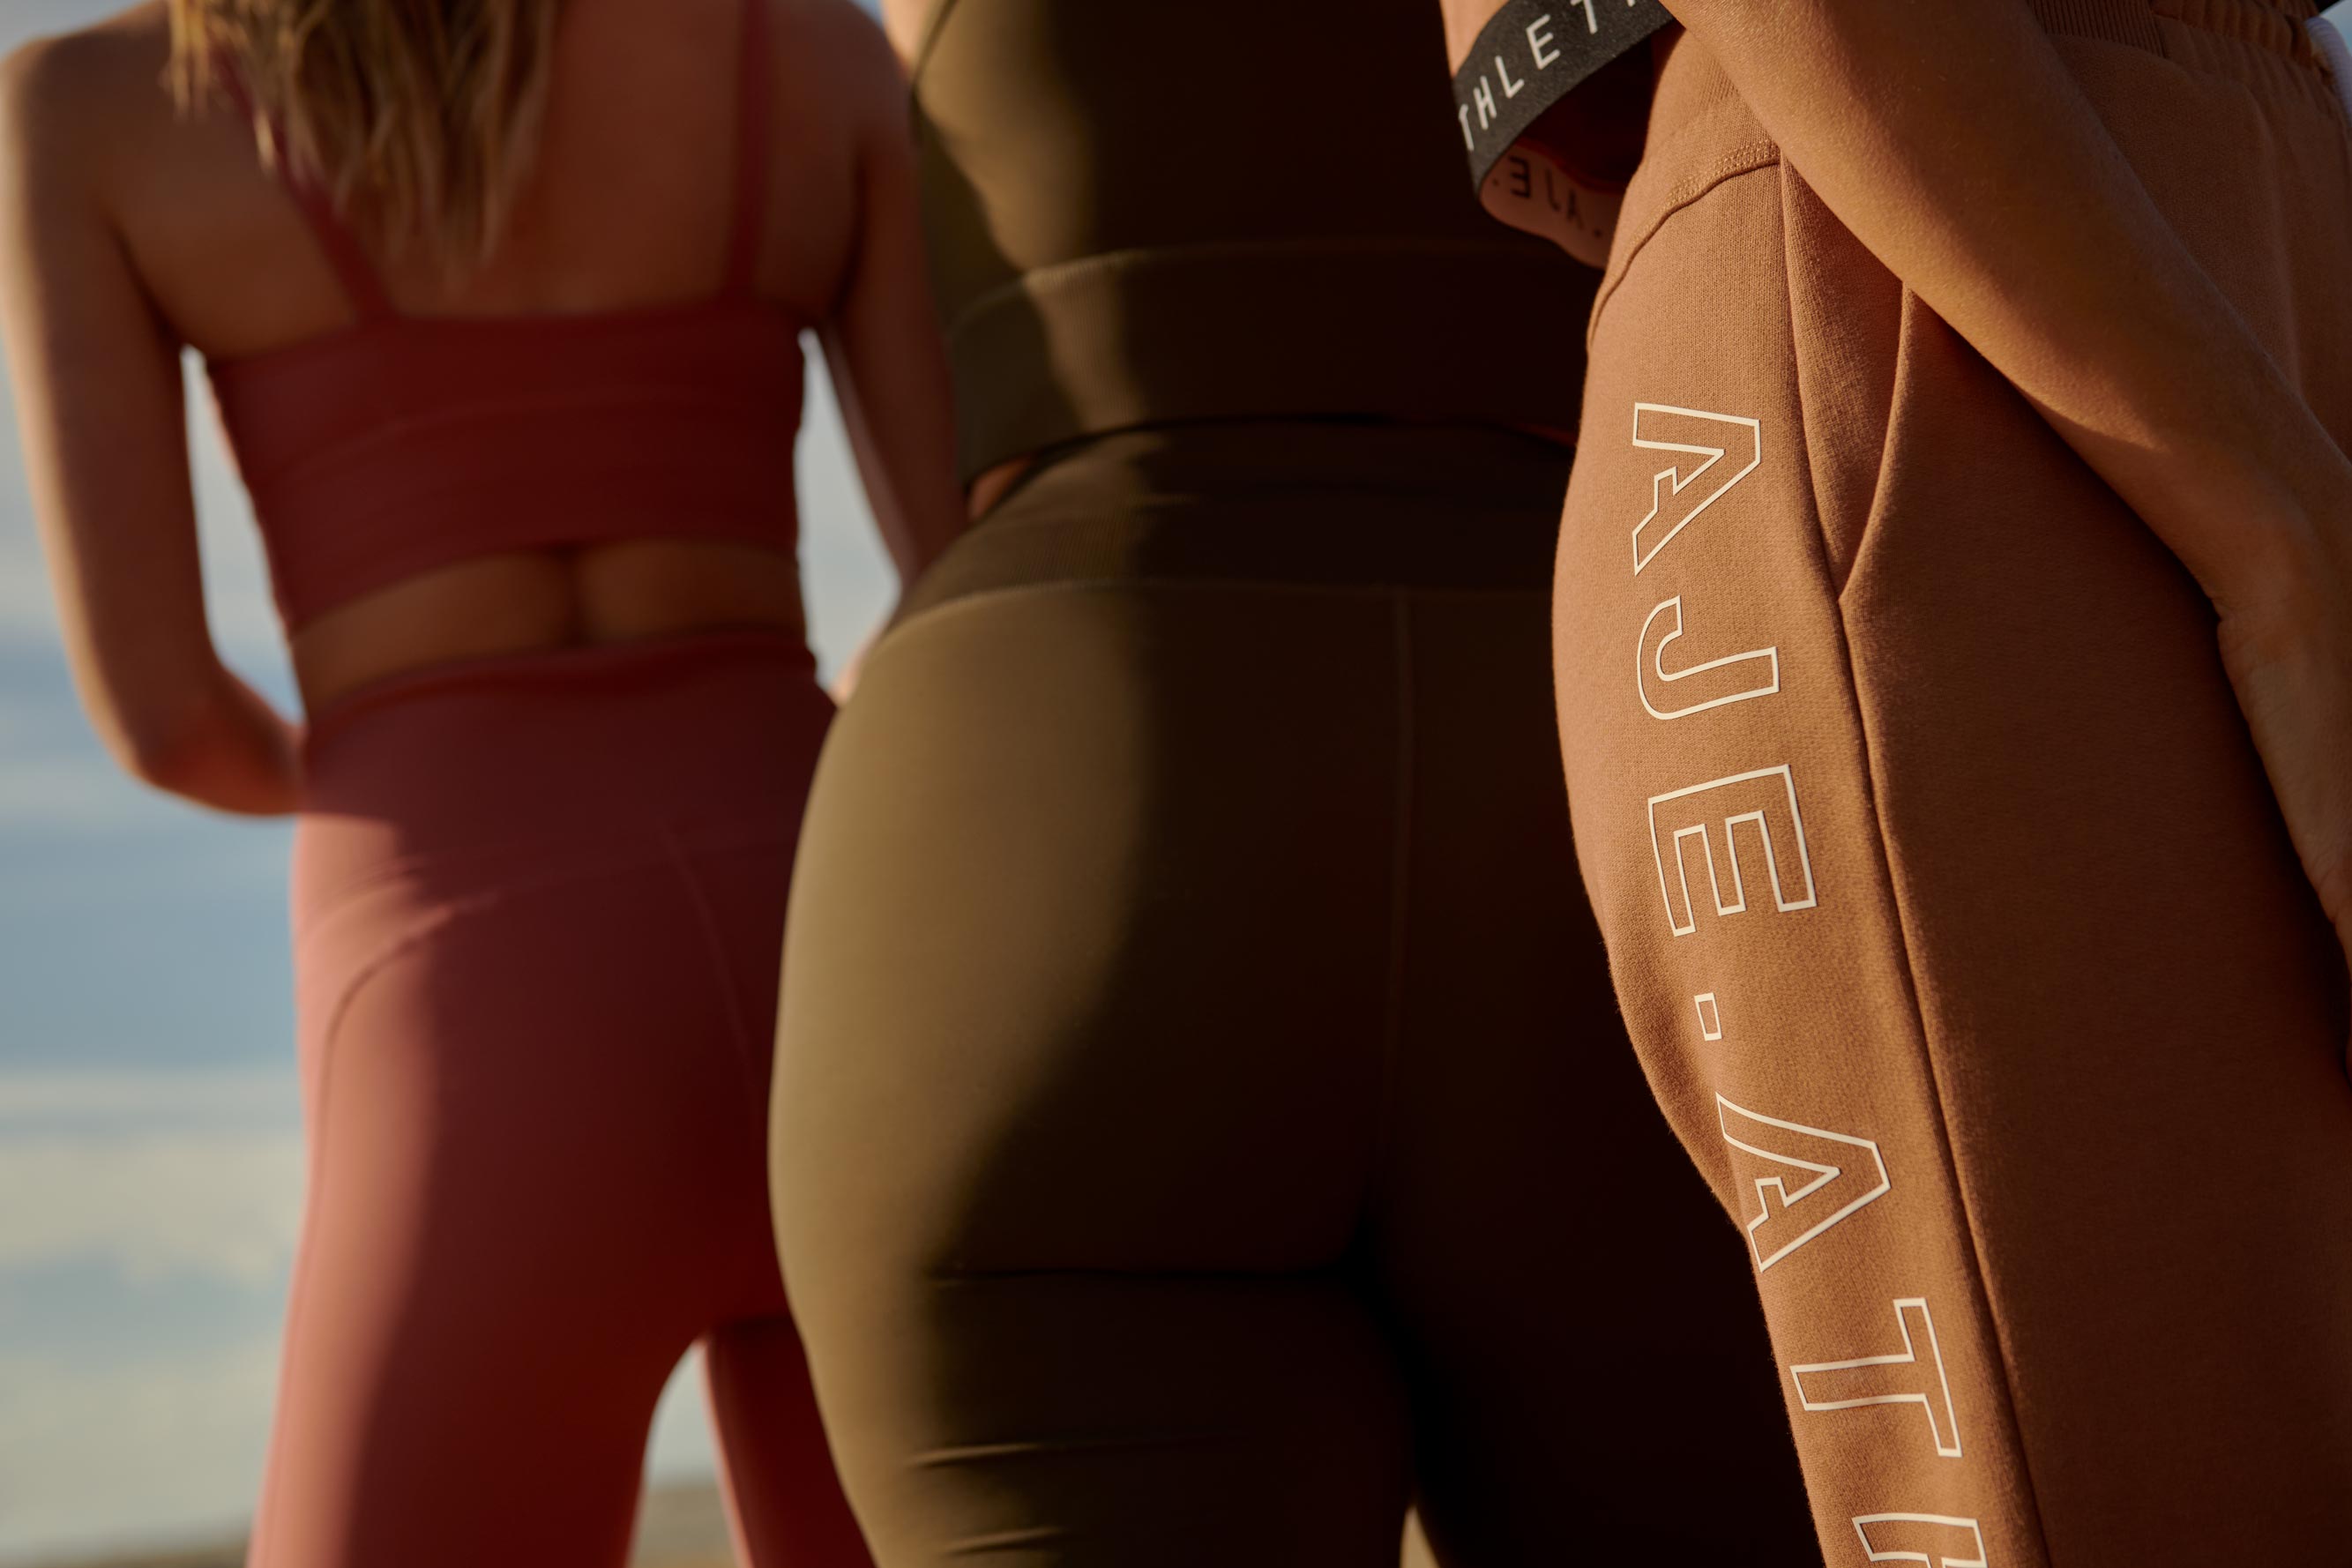 Aje Athletica's Latest Collection Is A Sporty Girl's Dream